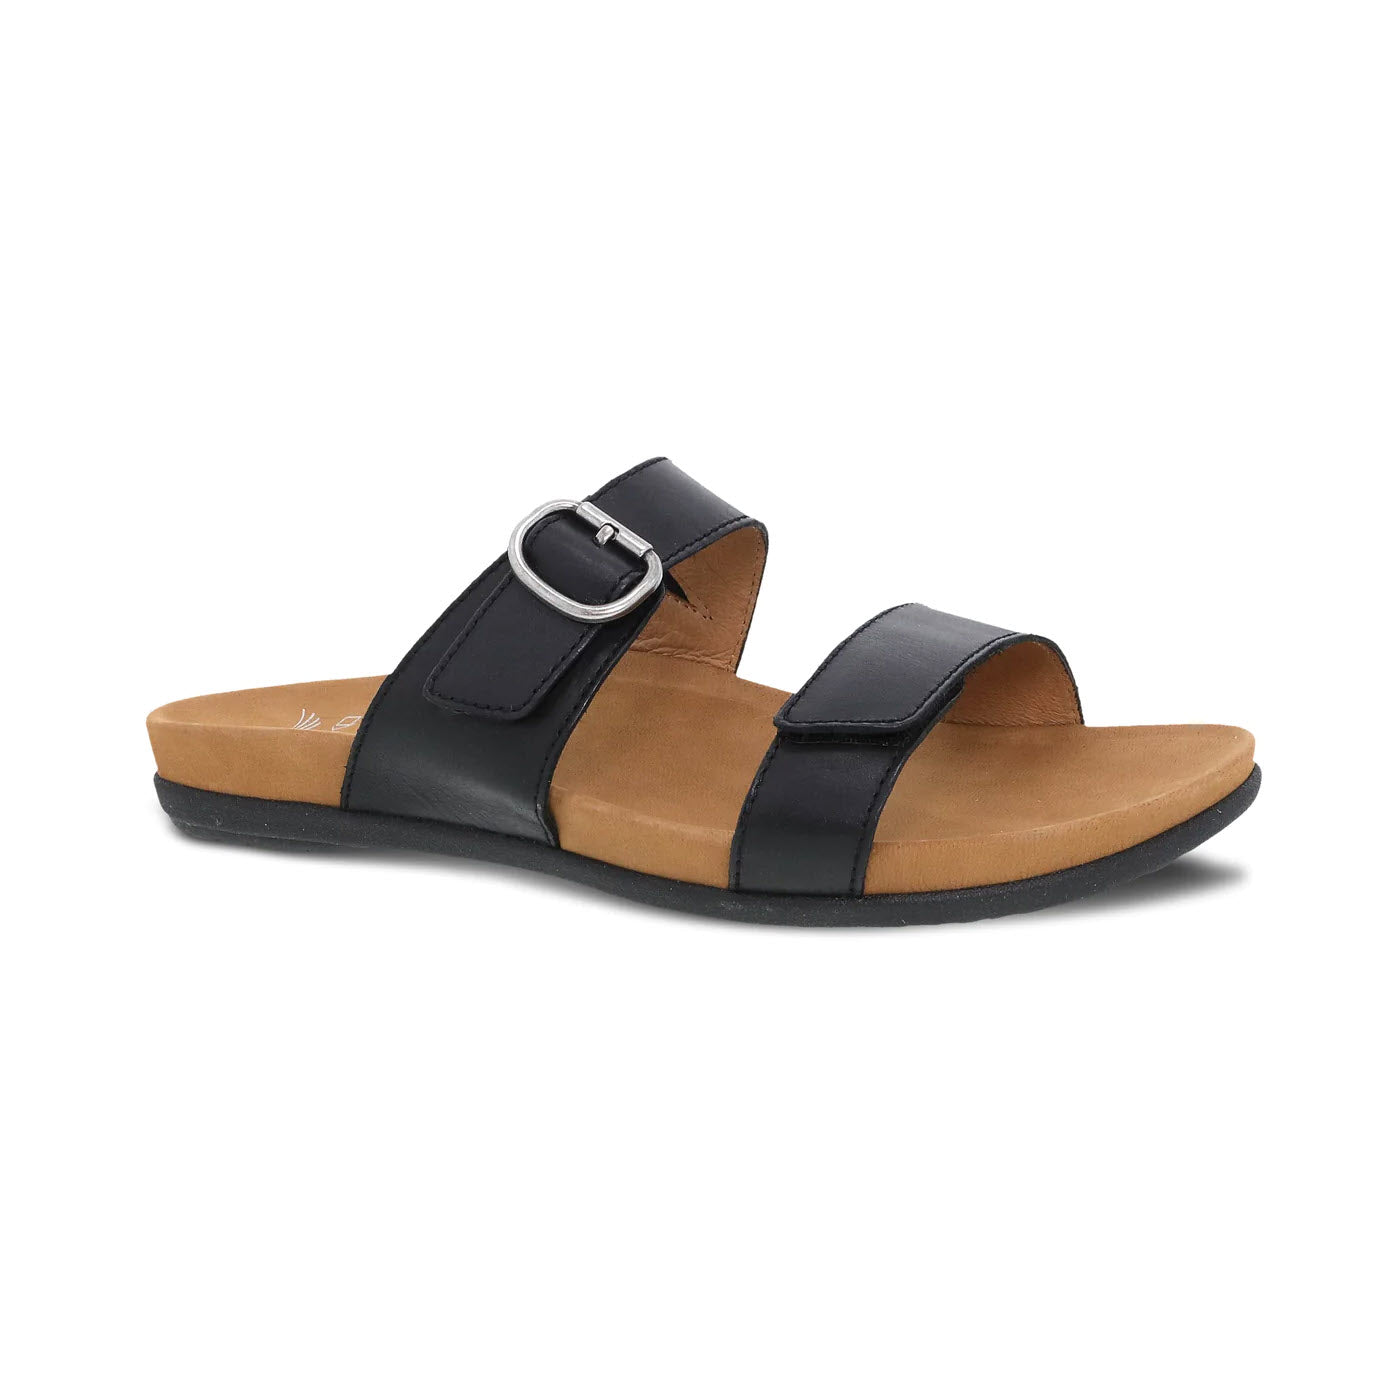 Dansko Justine Black slide sandal with two straps and a buckle, isolated on a white background.